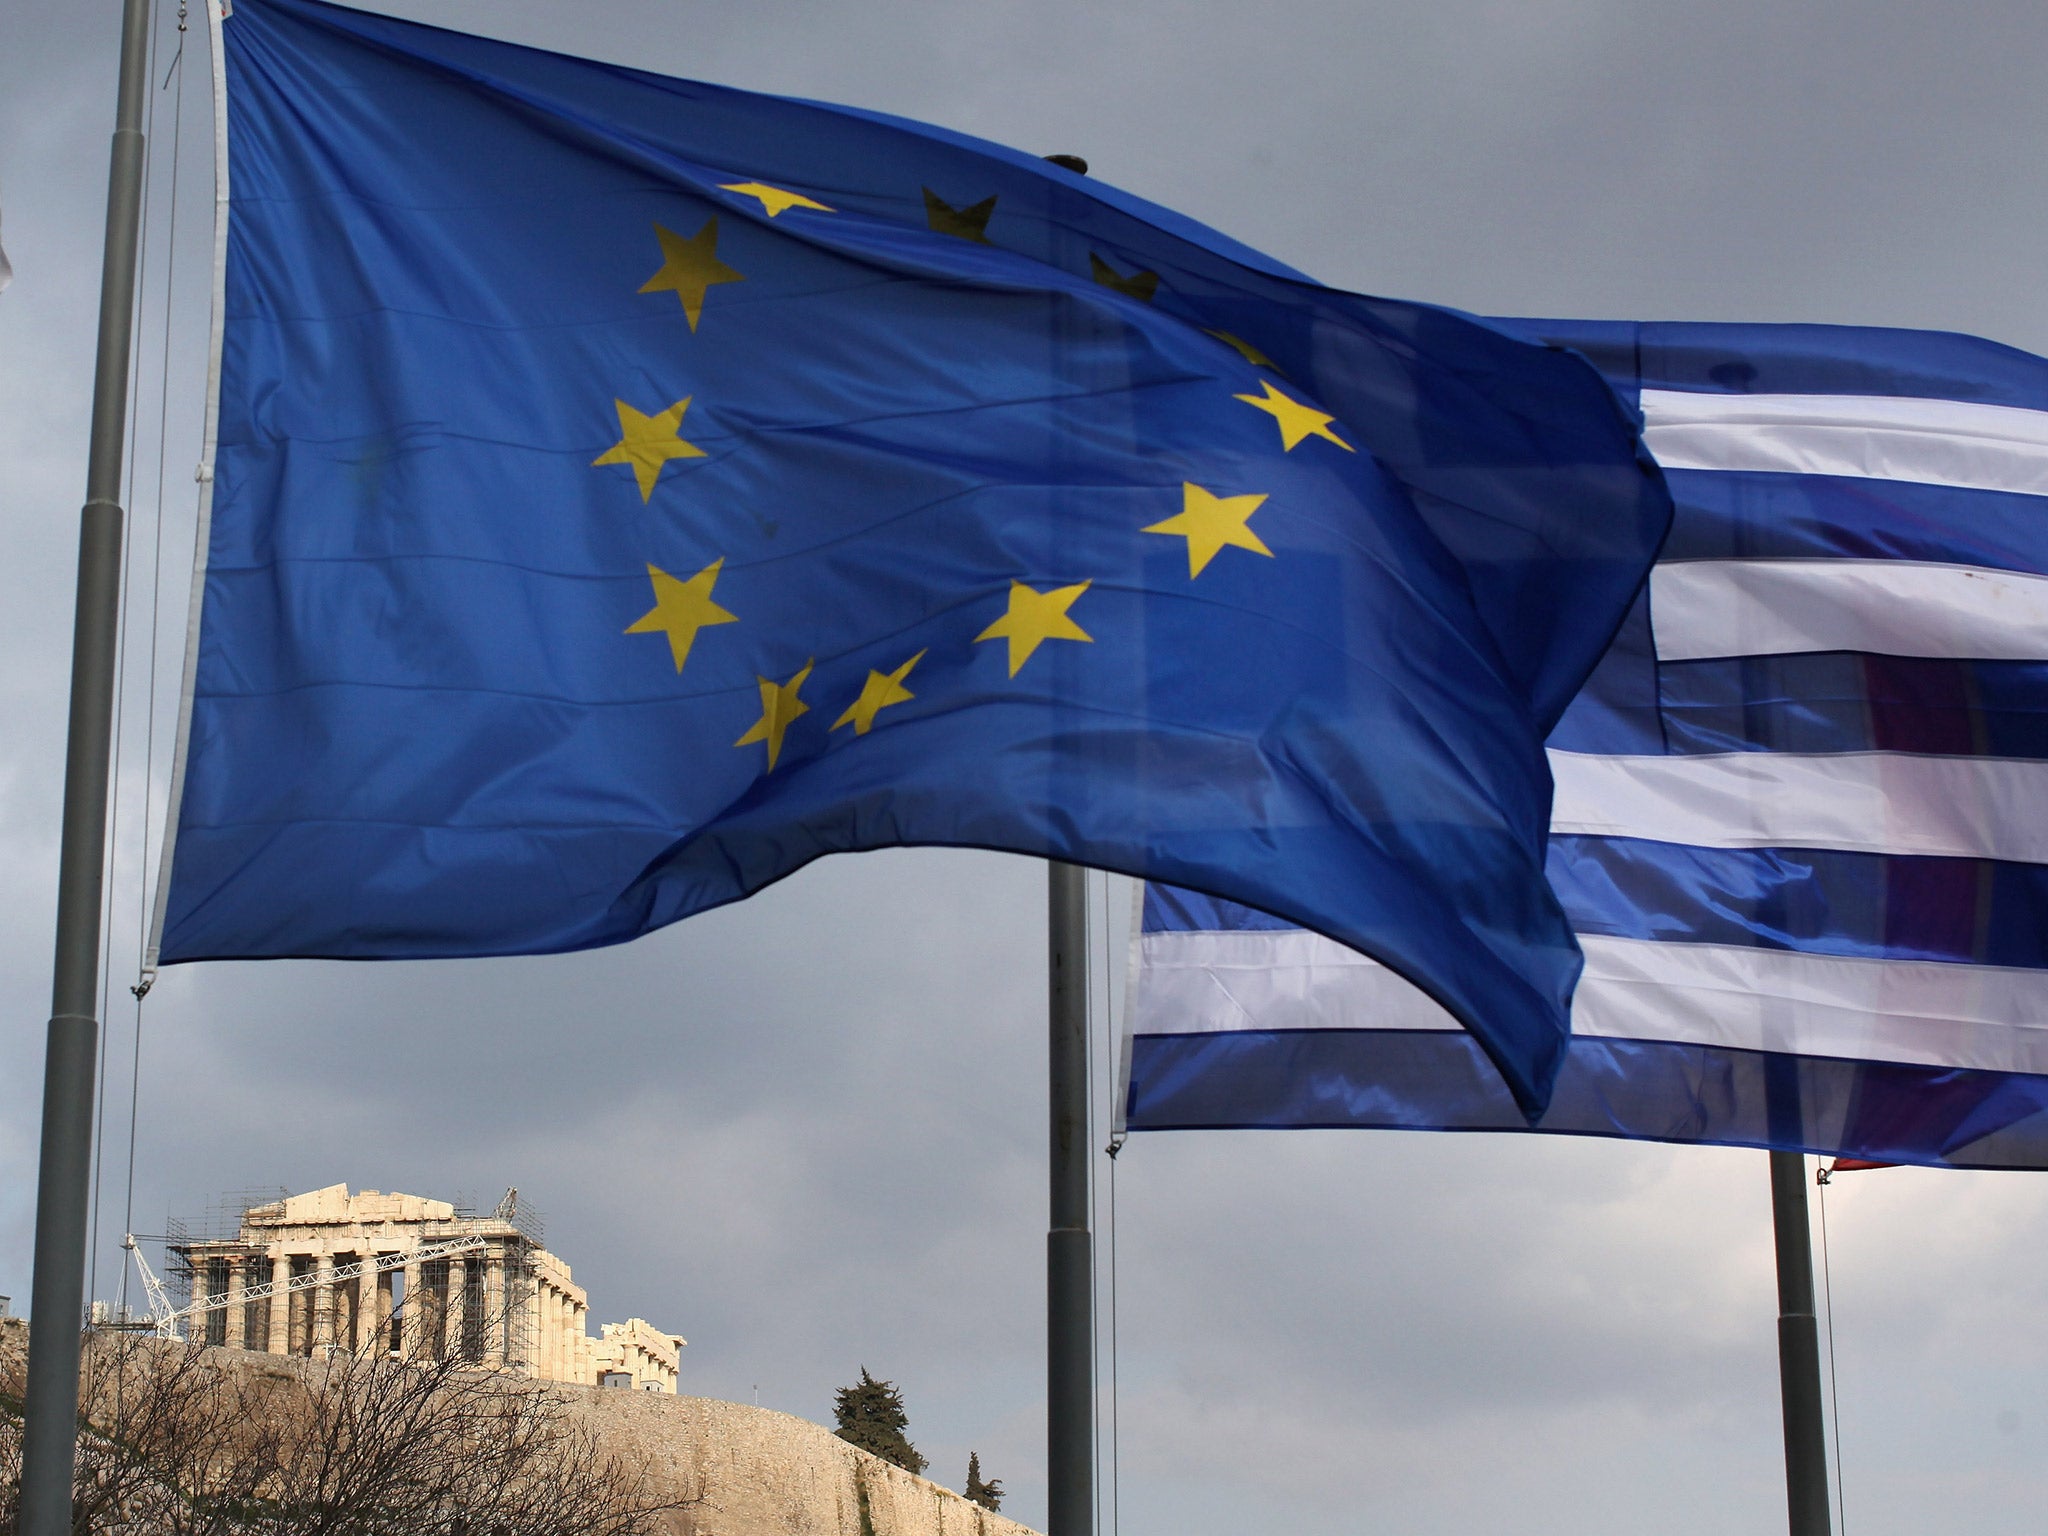 Eurozone finance ministers expressed disappointment at the Greek decision to hold a referendum on the bailout terms